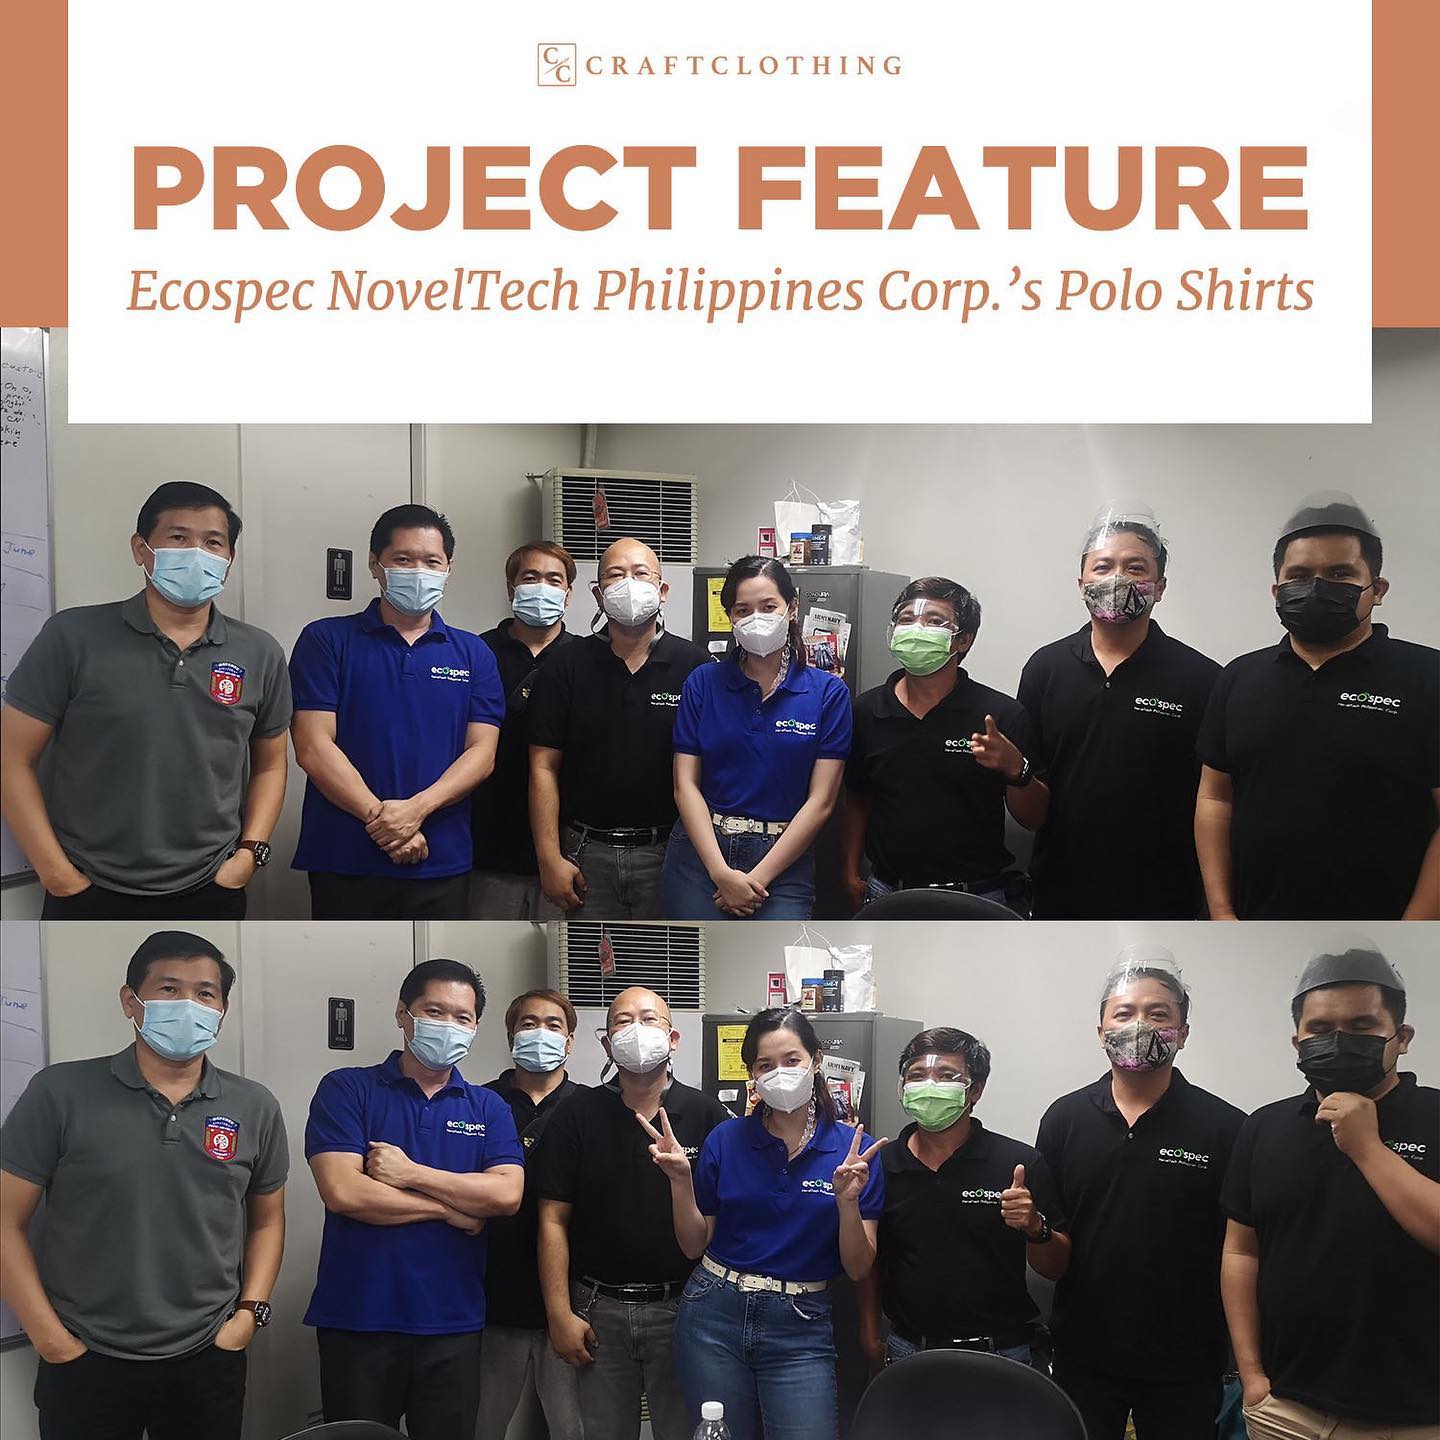 Project Feature: Ecospec NovelTech Philippines Corp.’s Polo Shirts